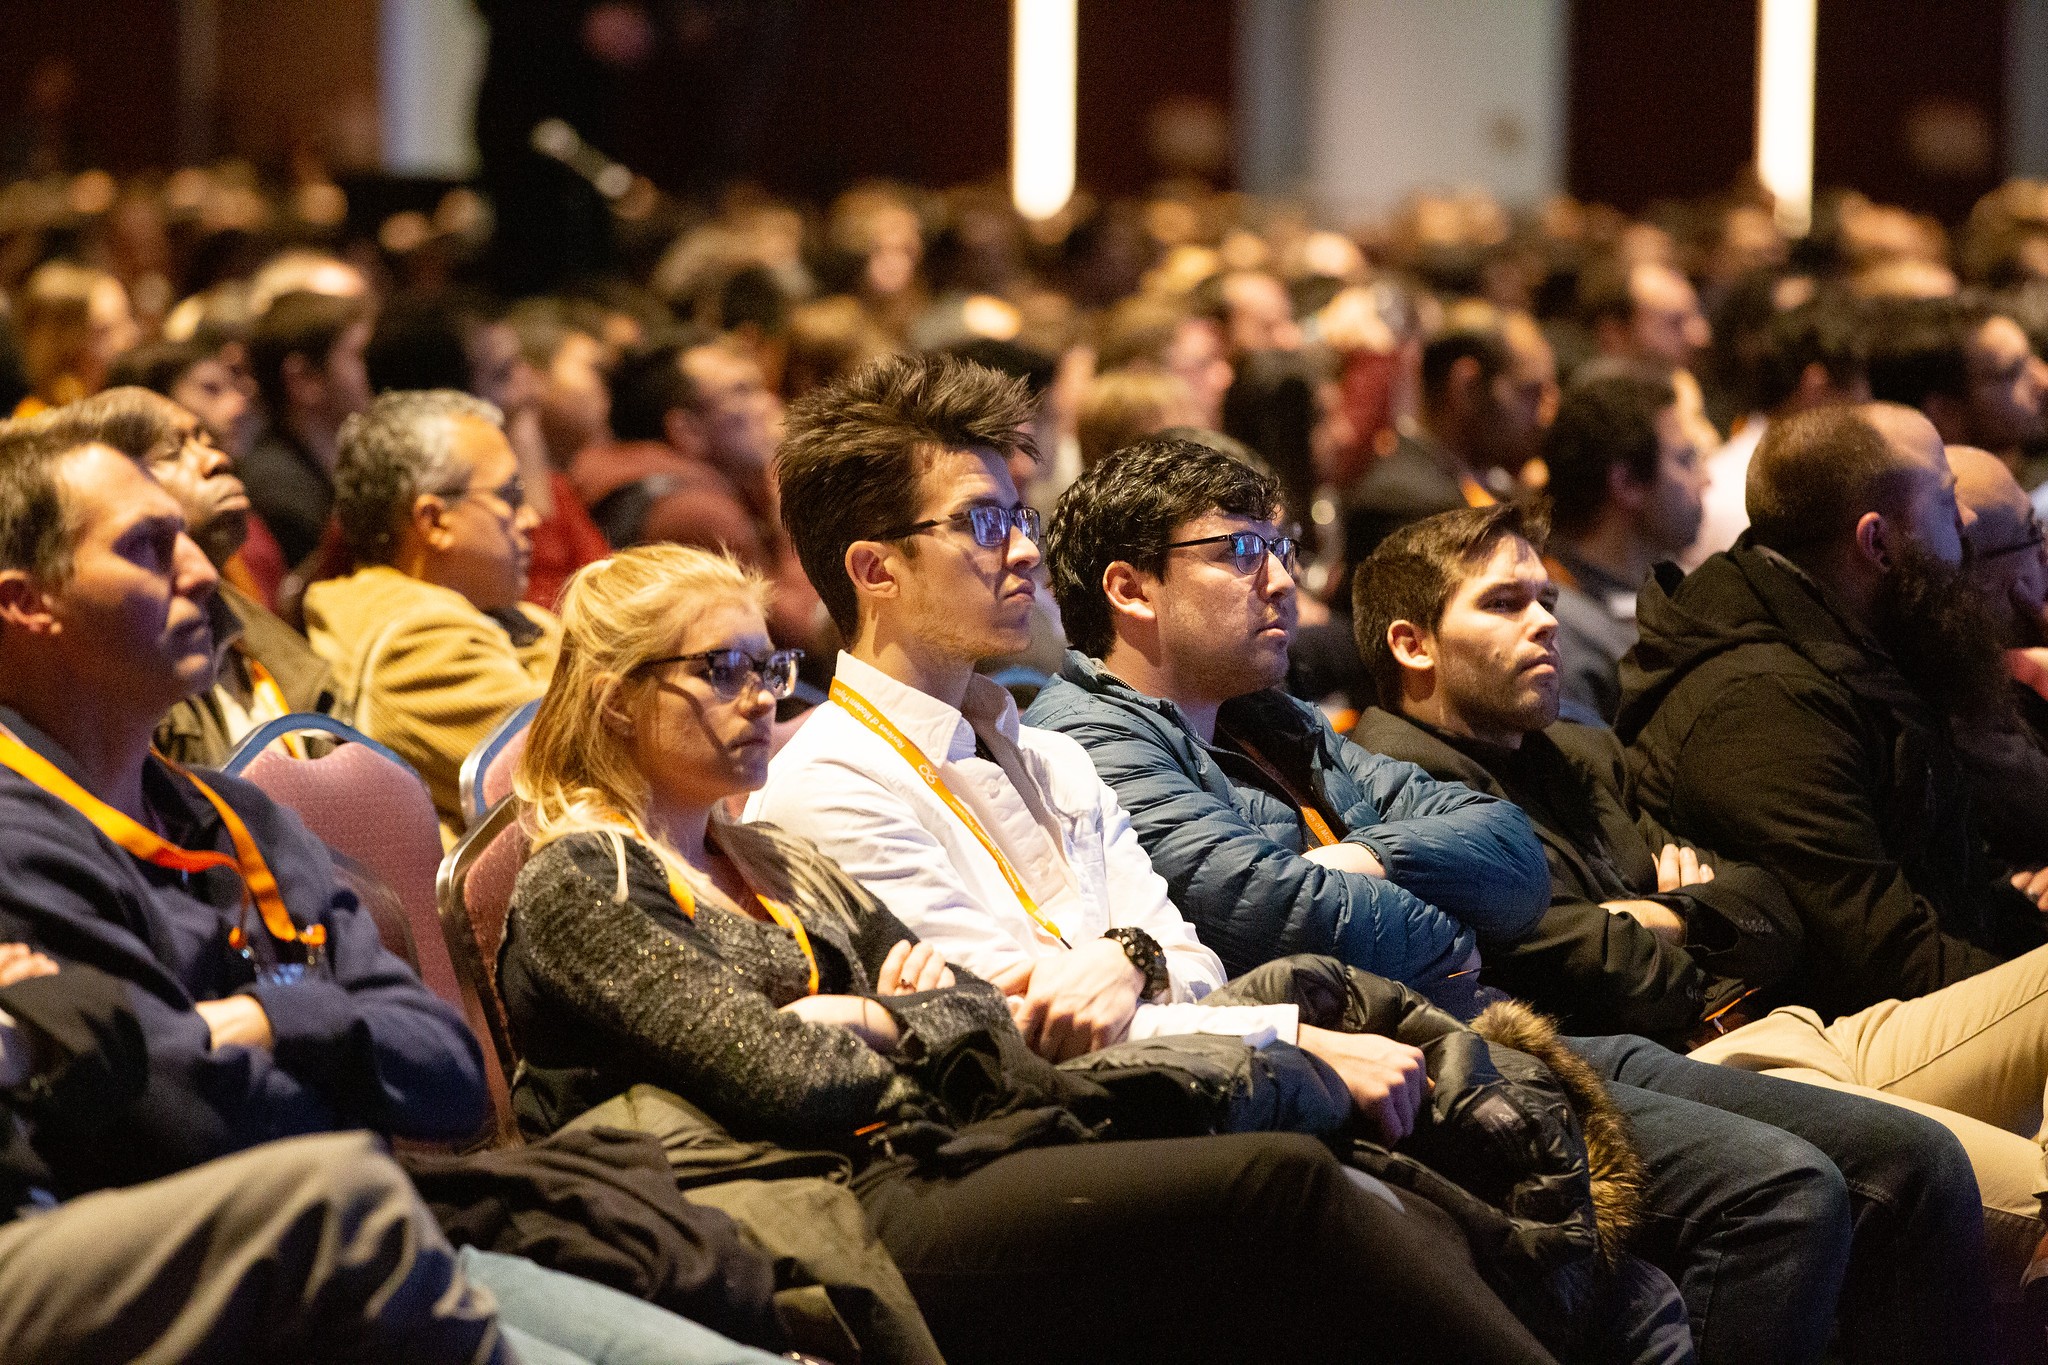 Audience watching a keynote presentation in a large hall